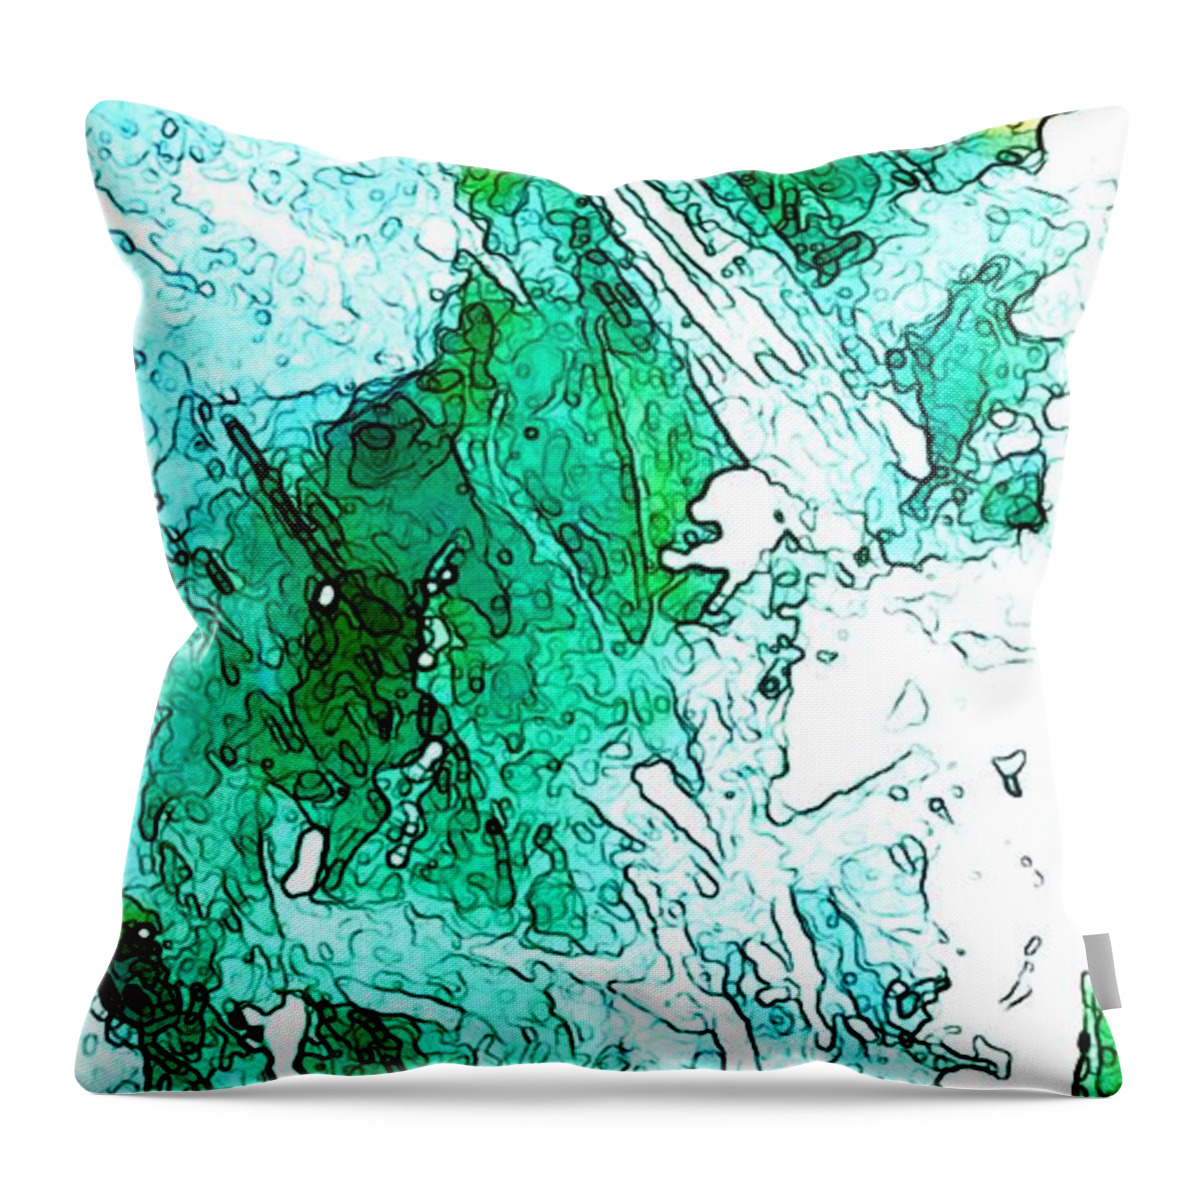 Abstract Throw Pillow featuring the digital art Endless Beginnings by Linda Mears